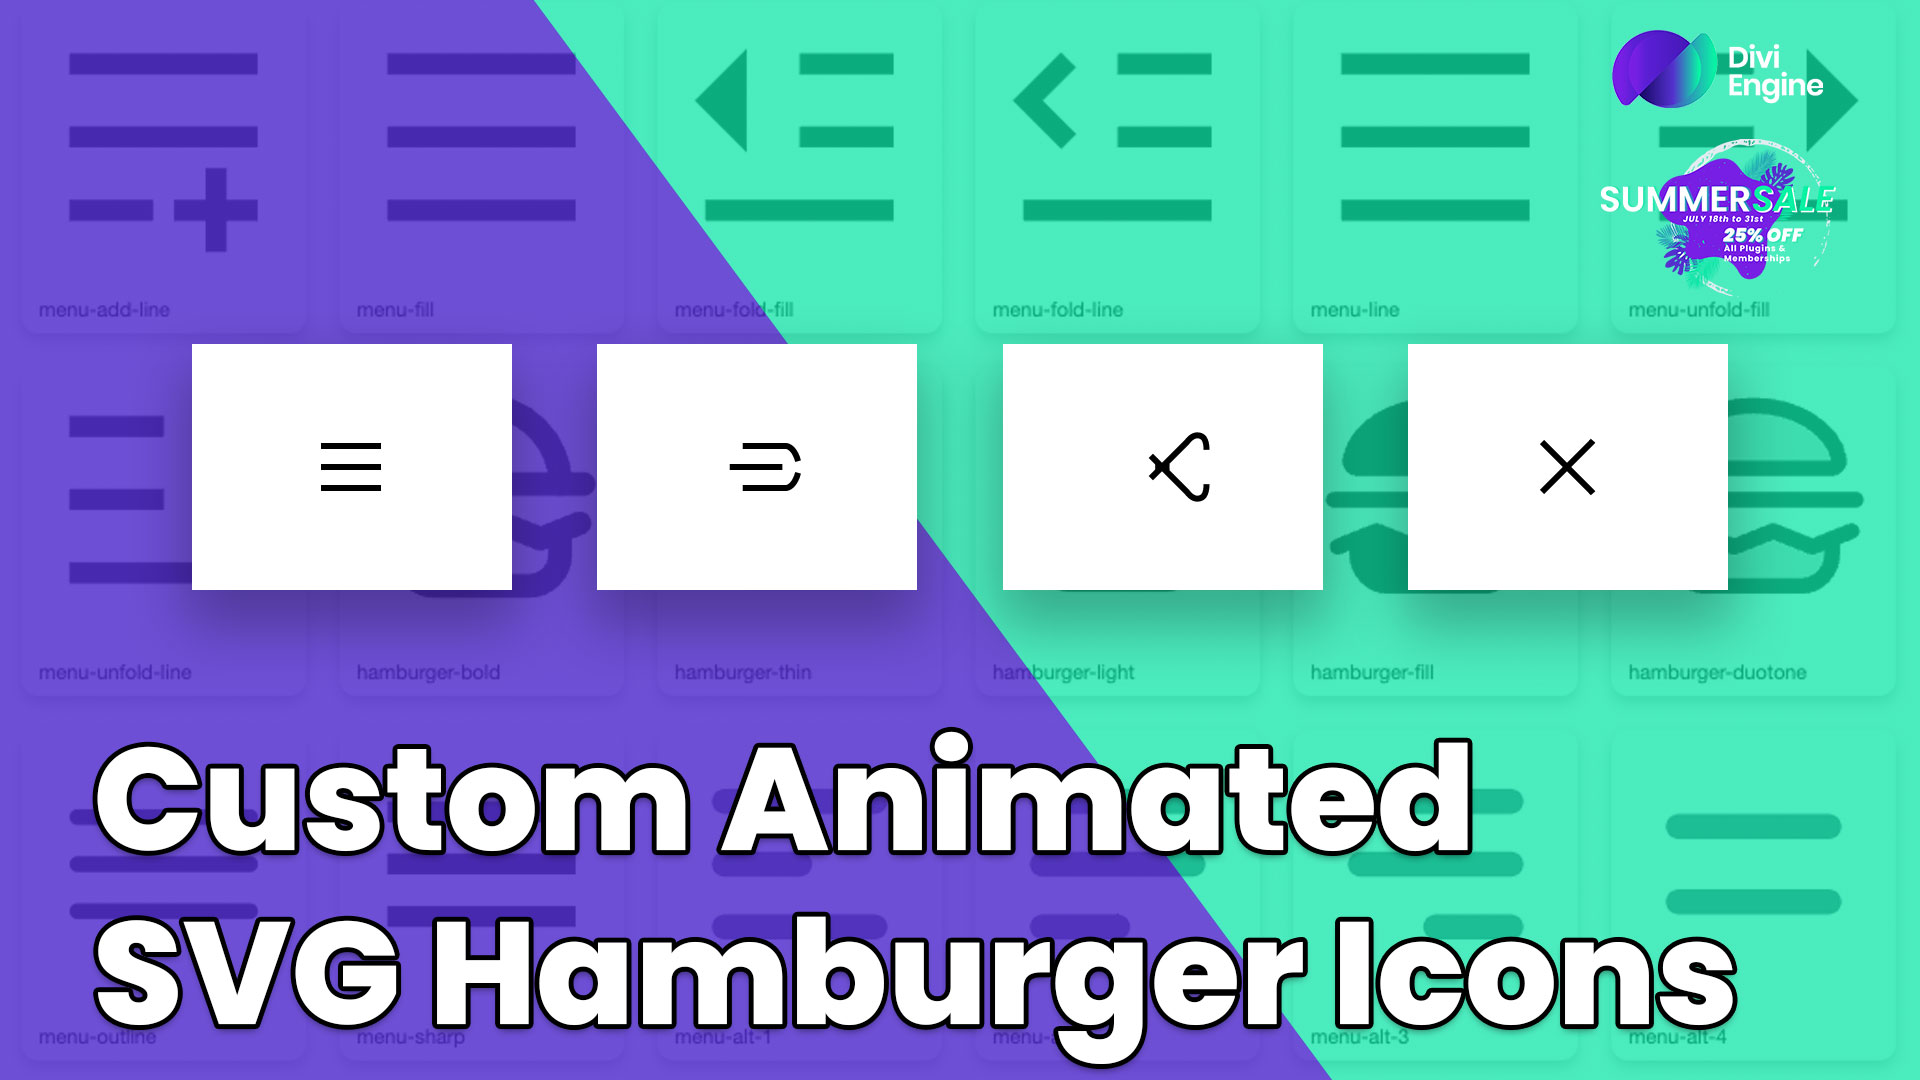 How to add a custom animated SVG hamburger icon to Divi